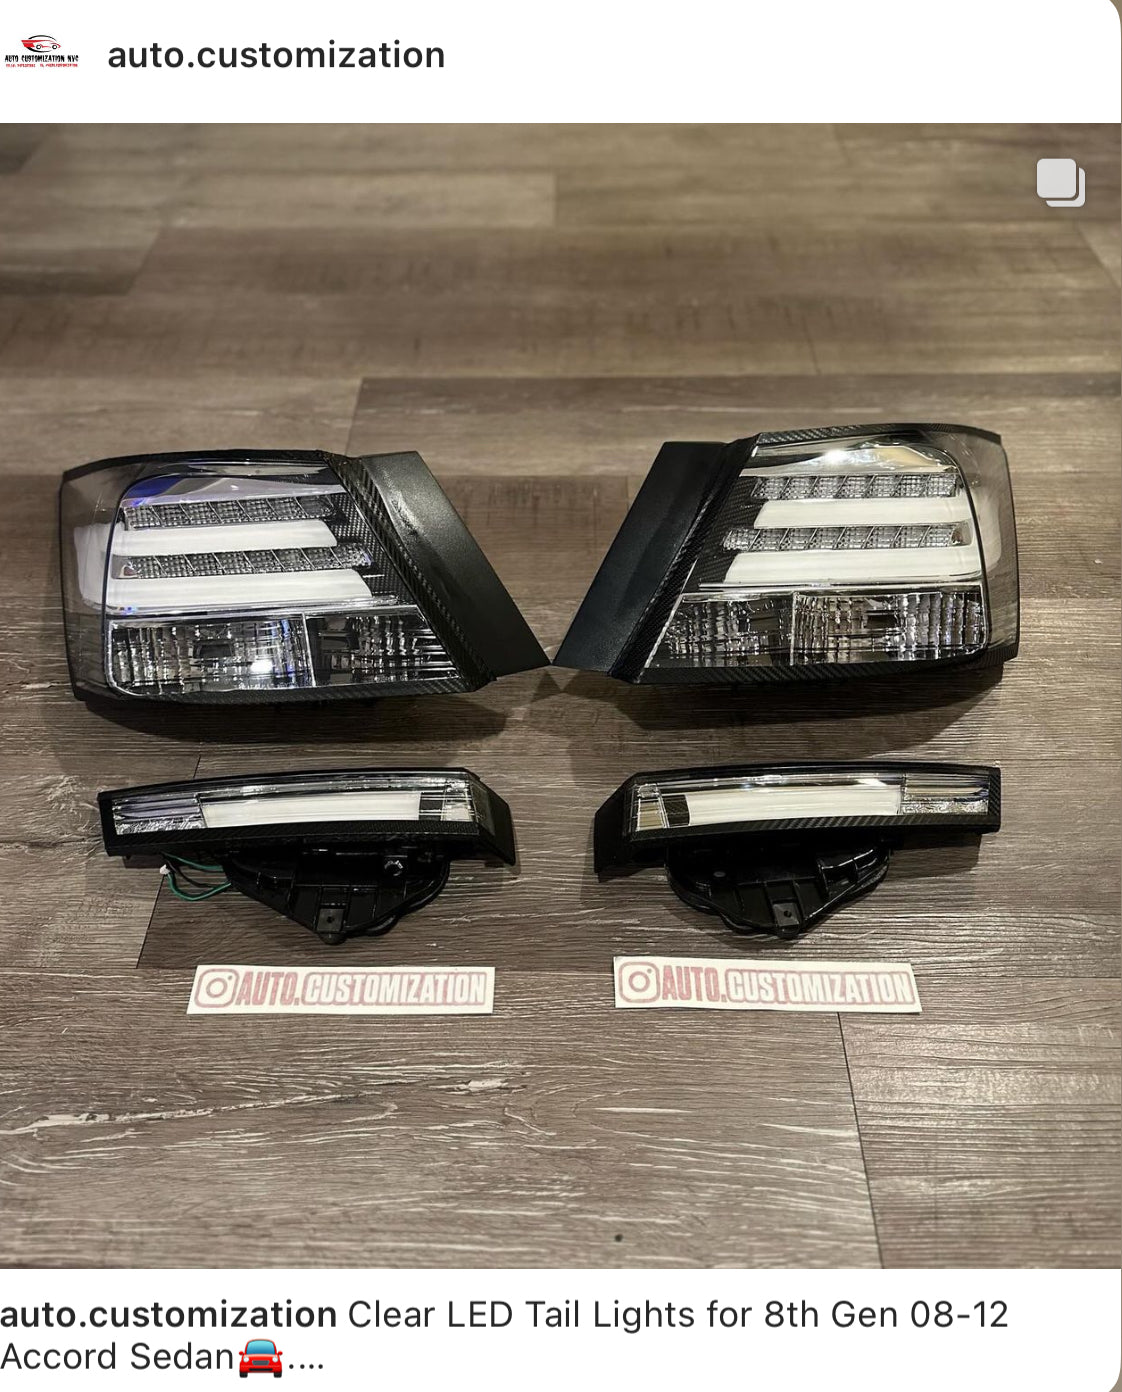 08-12 Accord Sedan Color LED Tail Lights with Inspire Trunk Set of Lights.